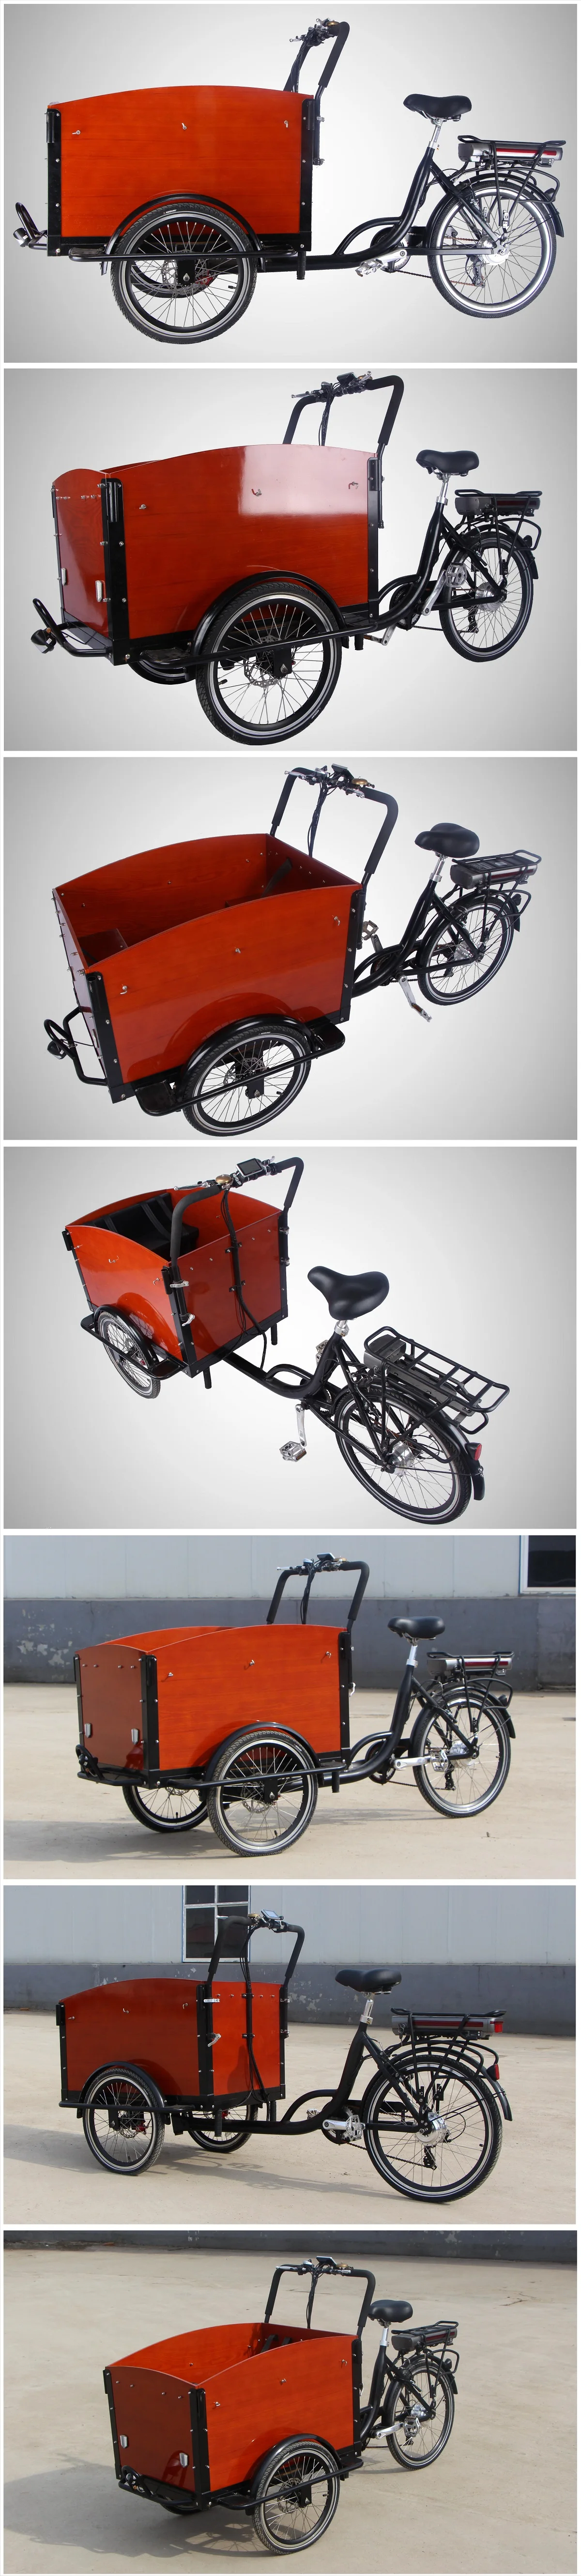 Dutch Popular Cargo Bike 3 Wheels Electric Tricycle Bakfiets with Carriage